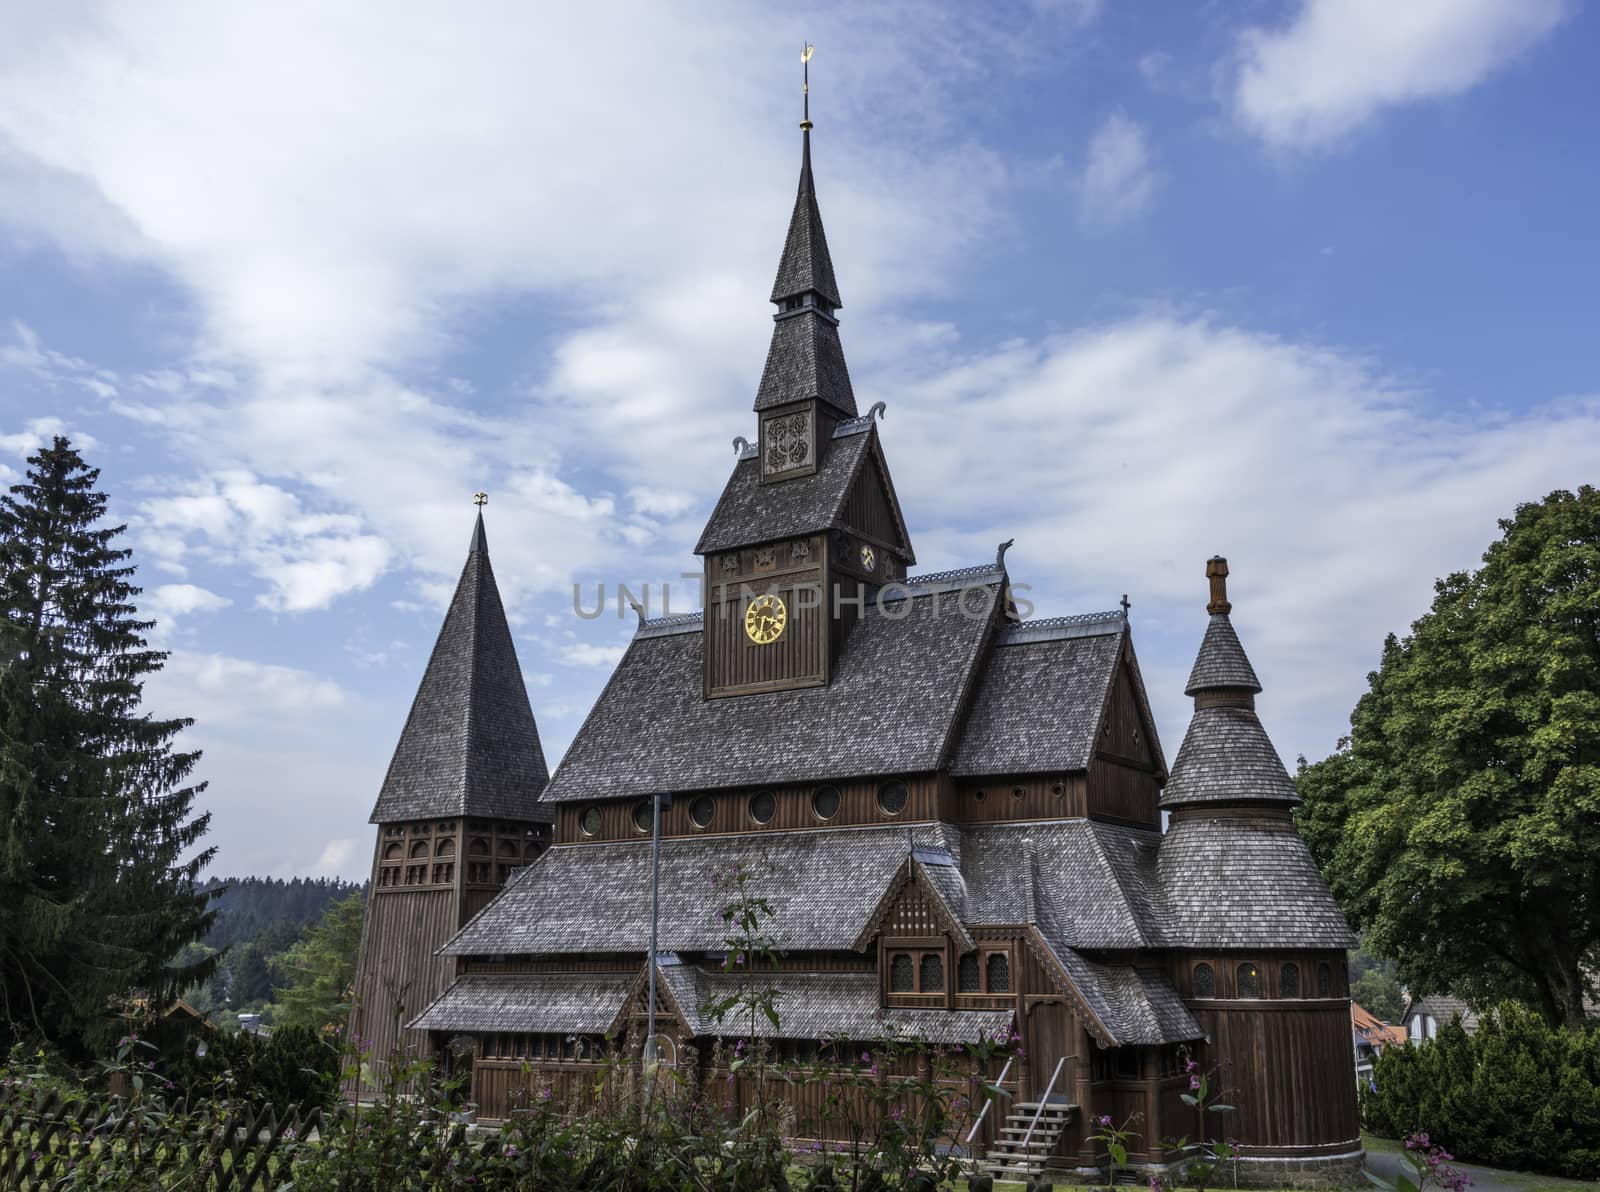 Stave church totally made from wood  from 1907 above Hahnenklee village in the Harz Mountains